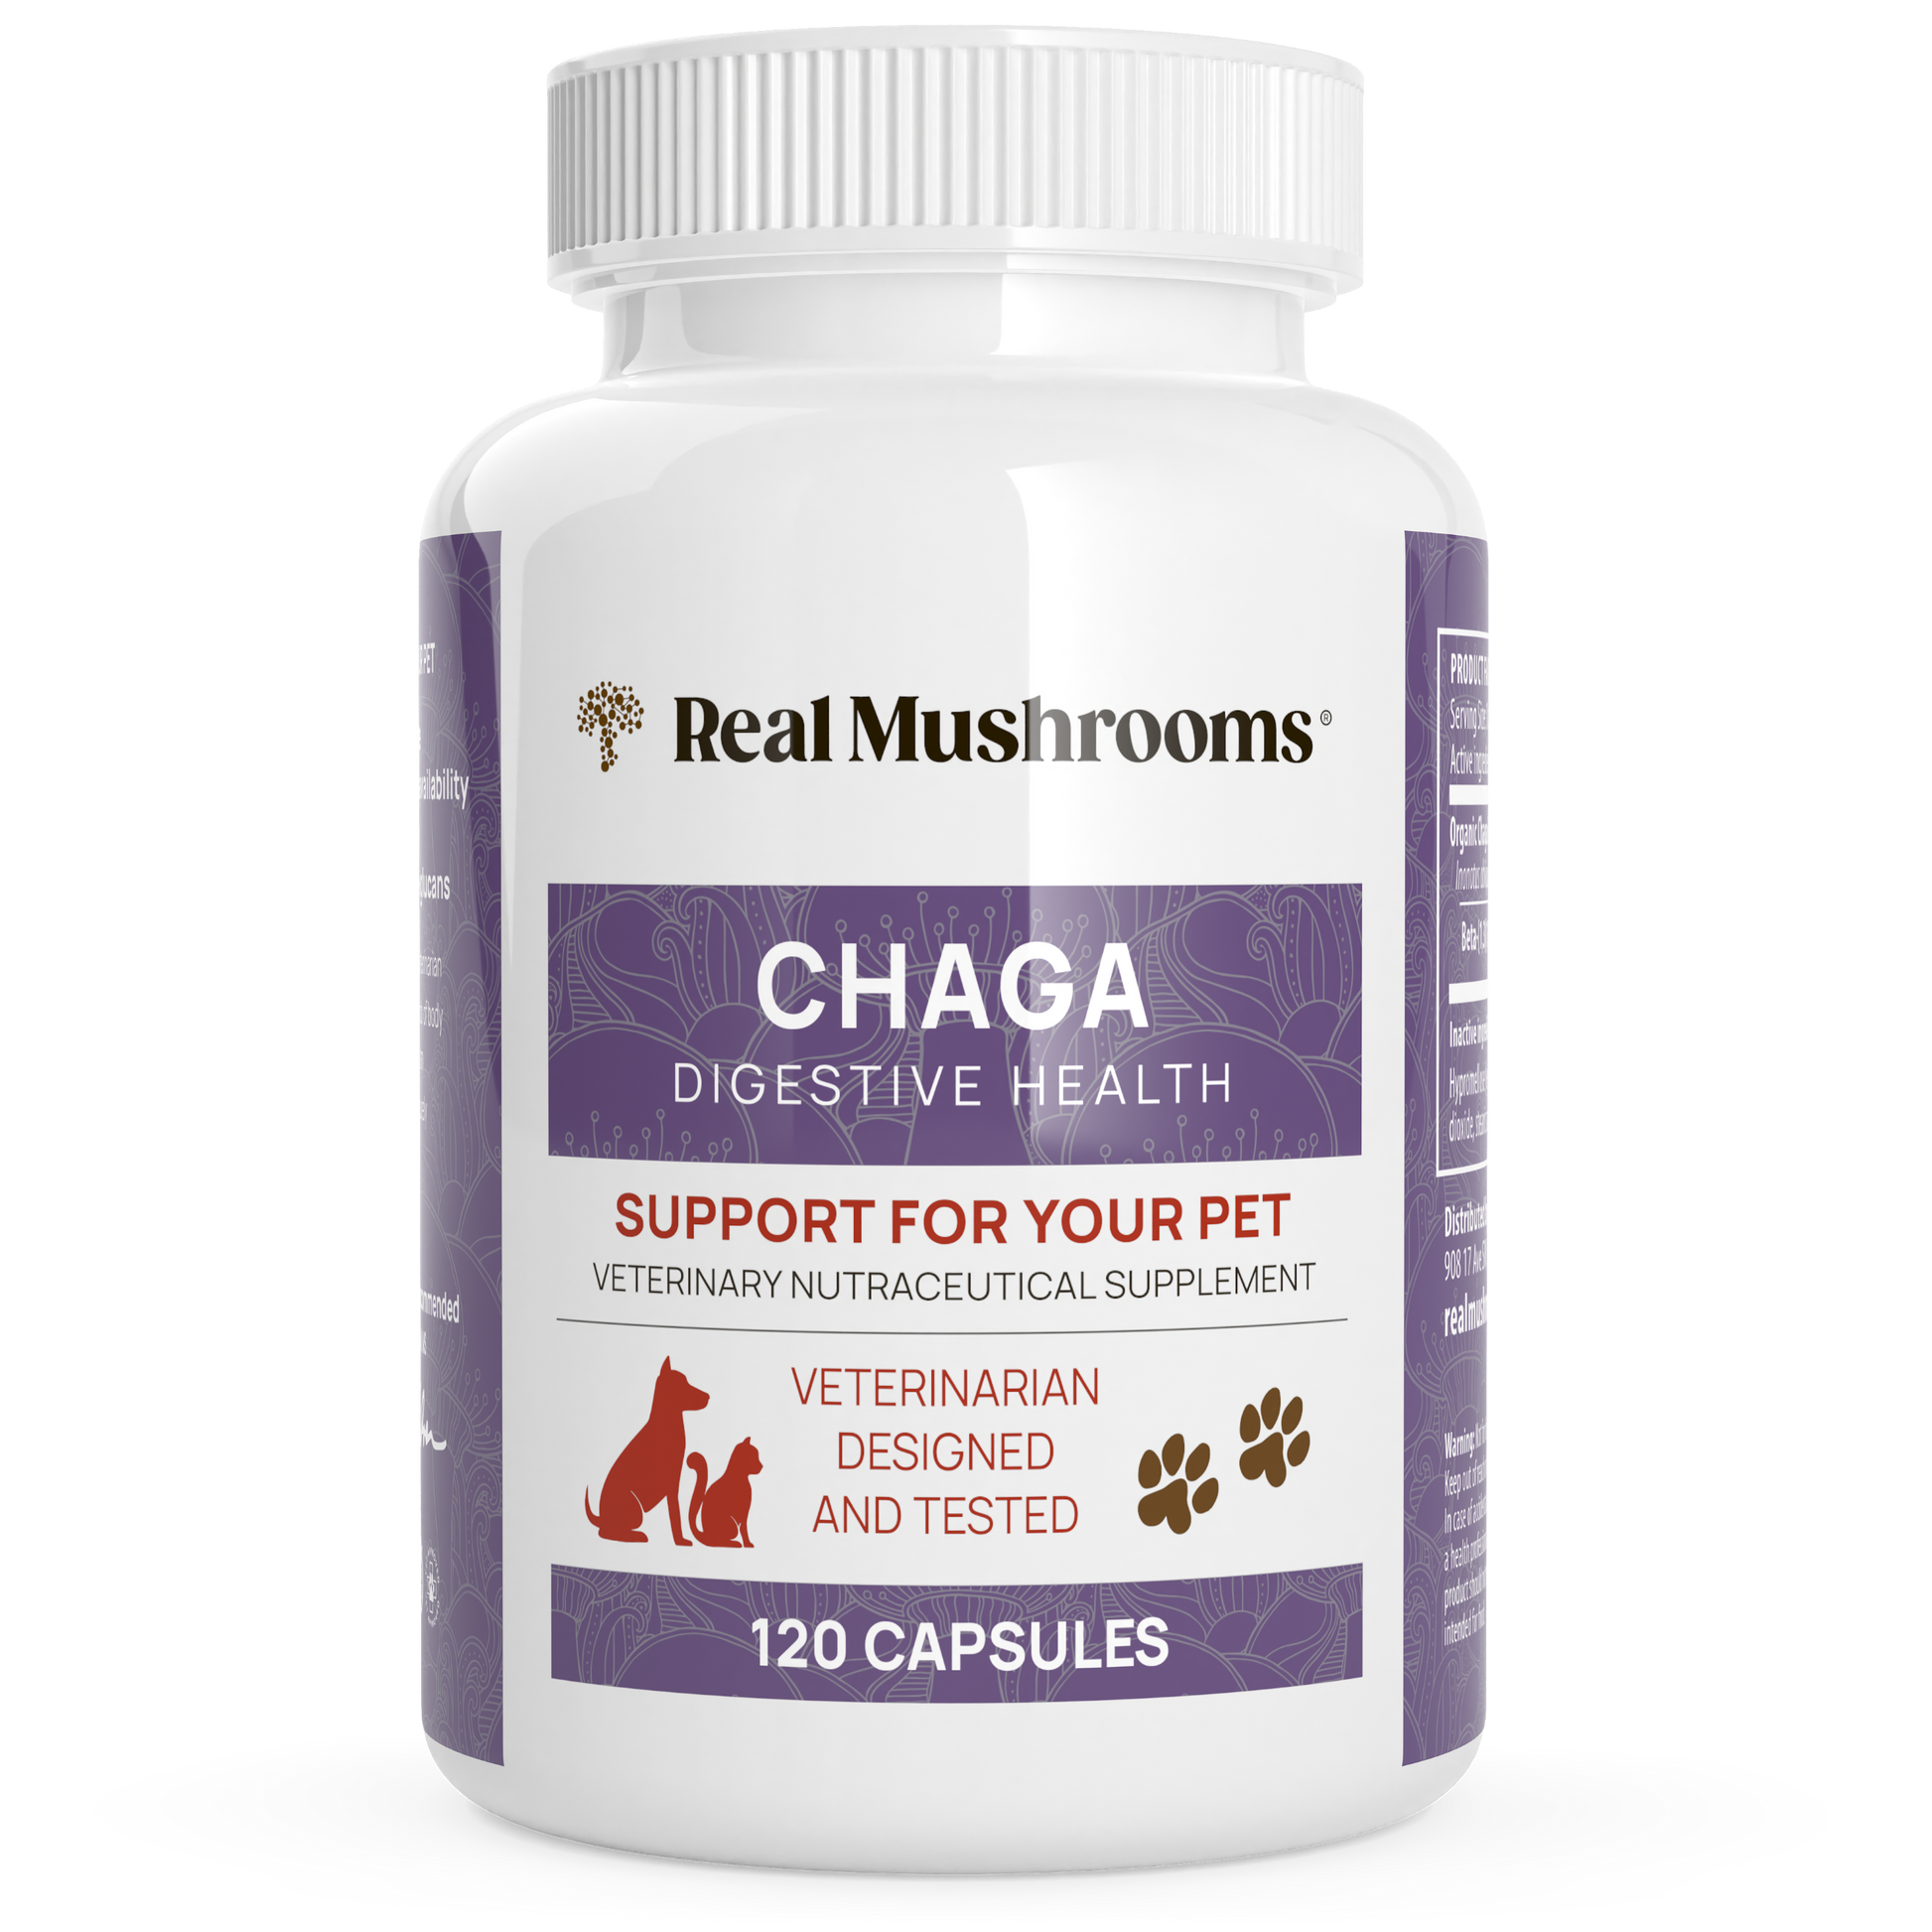 Real Mushrooms Organic Chaga Extract Capsules for Pets support for dogs and cats.